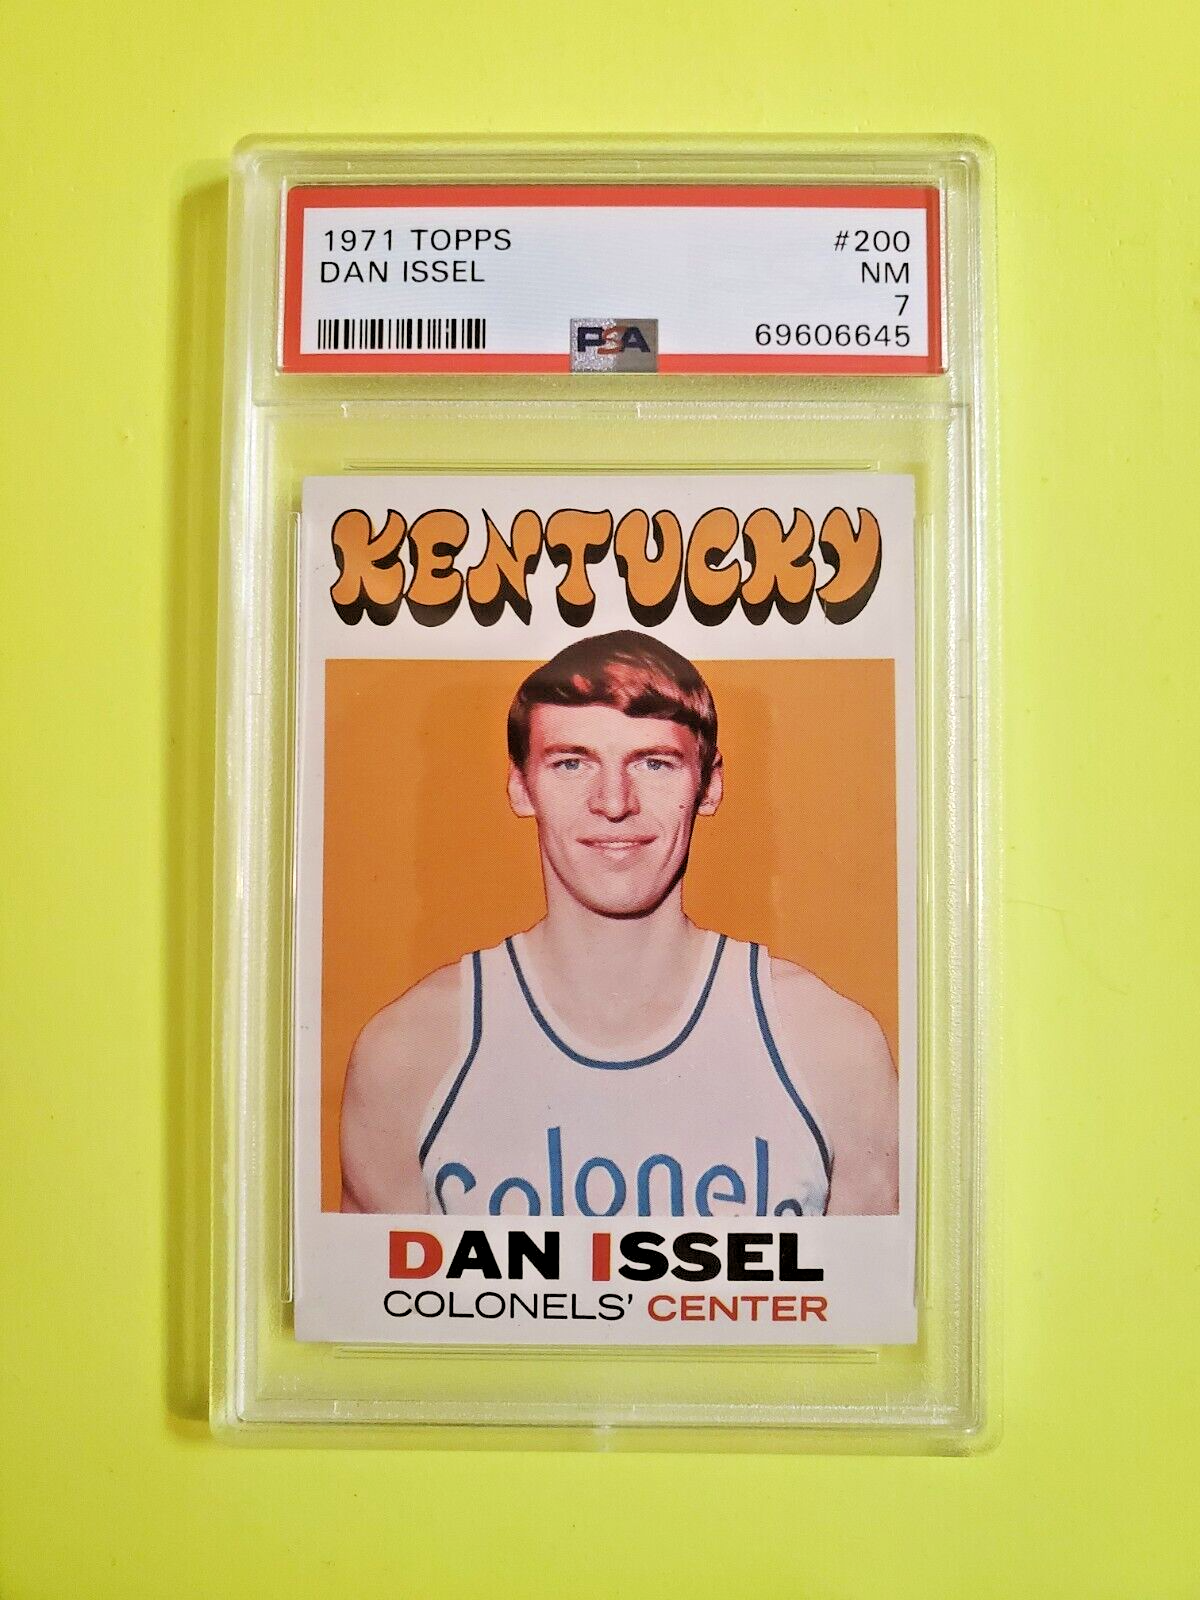 1971 Topps Dan Issel Rookie RC Card #200 - ABA Kentucky Colonels Graded PSA 7 NM. rookie card picture